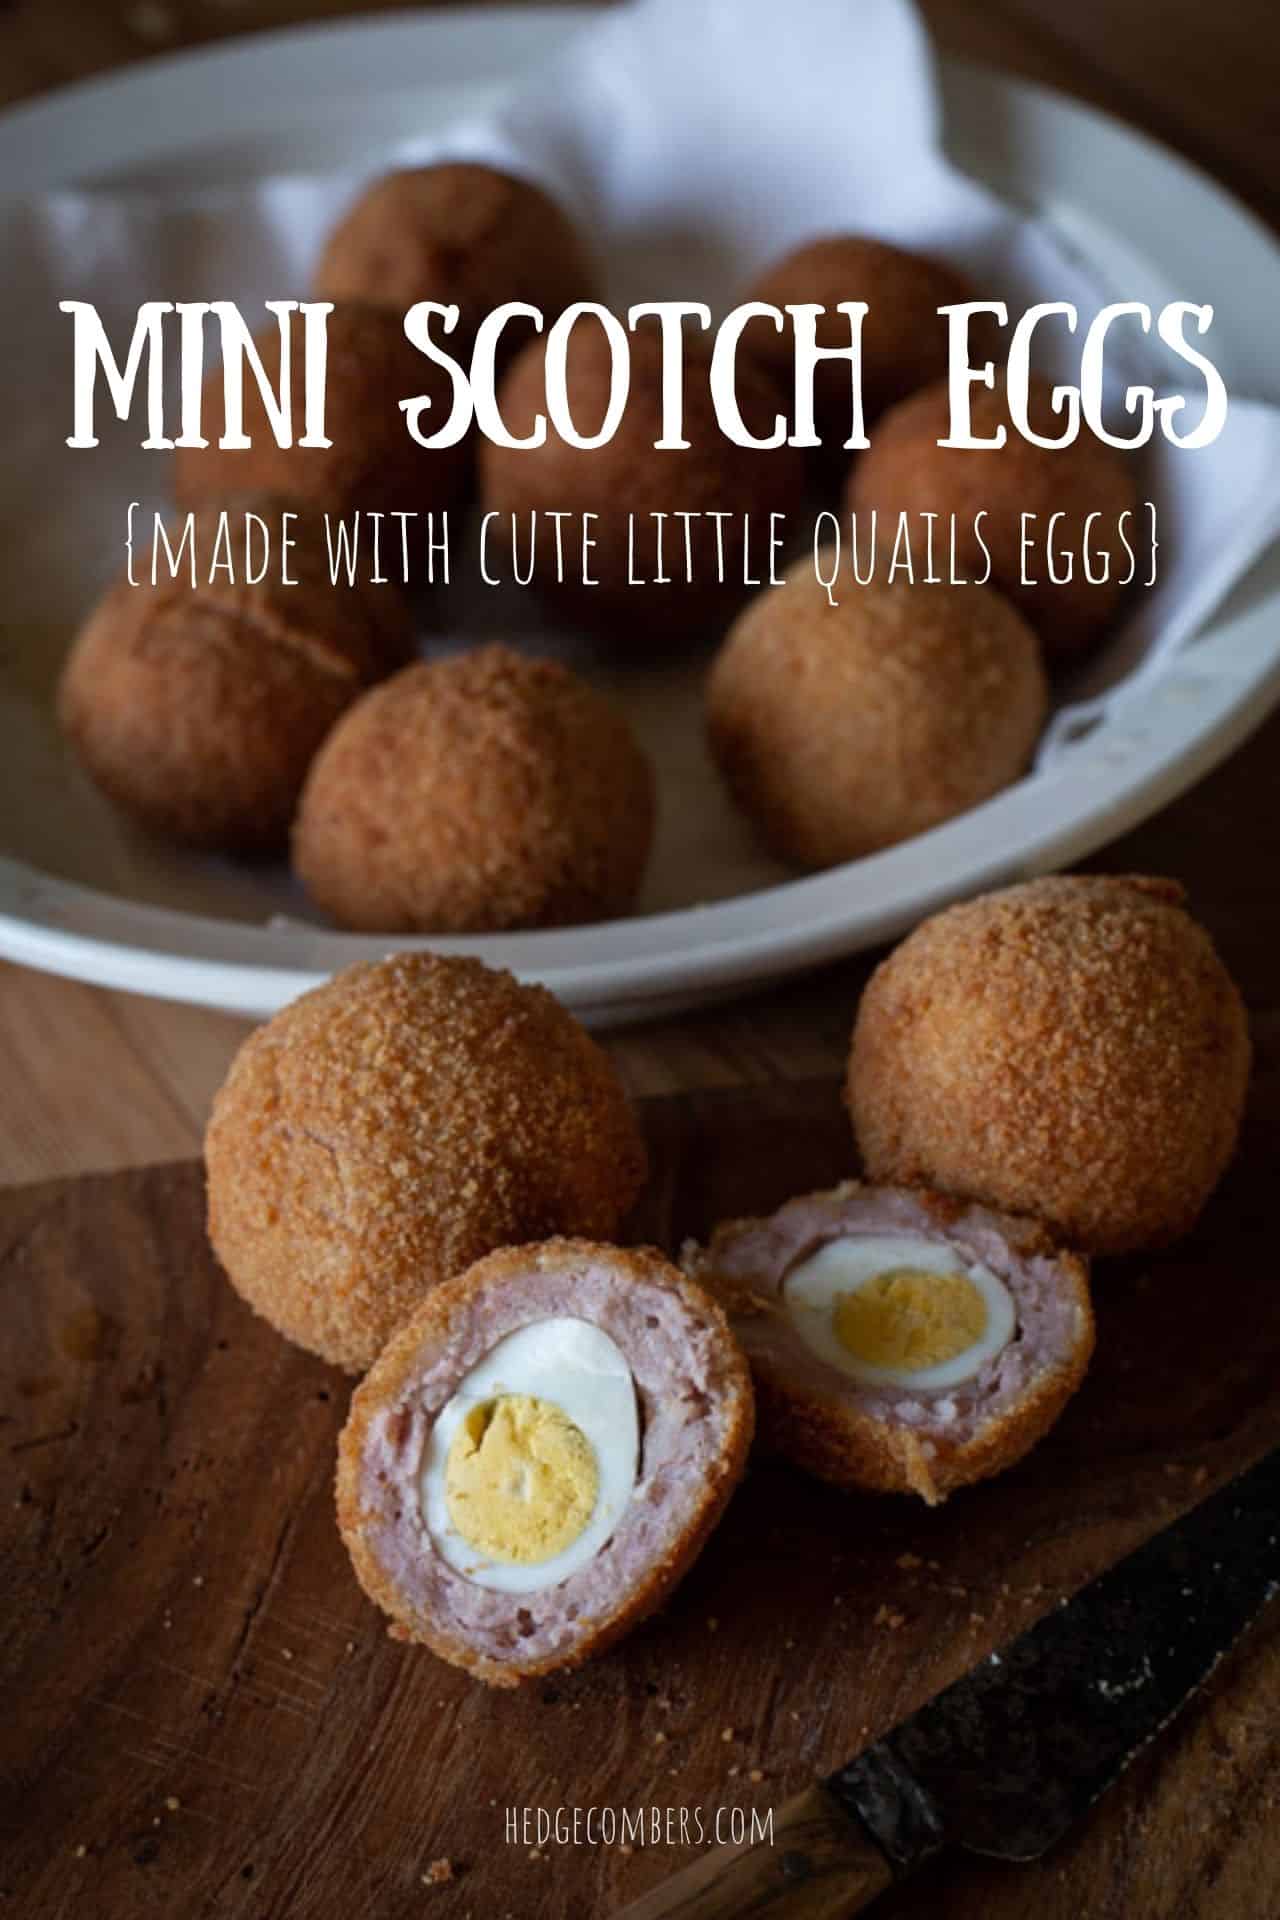 wooden board with white bowl filled with golden brown mini scotch eggs, and one scotch egg cut in half to show the centre